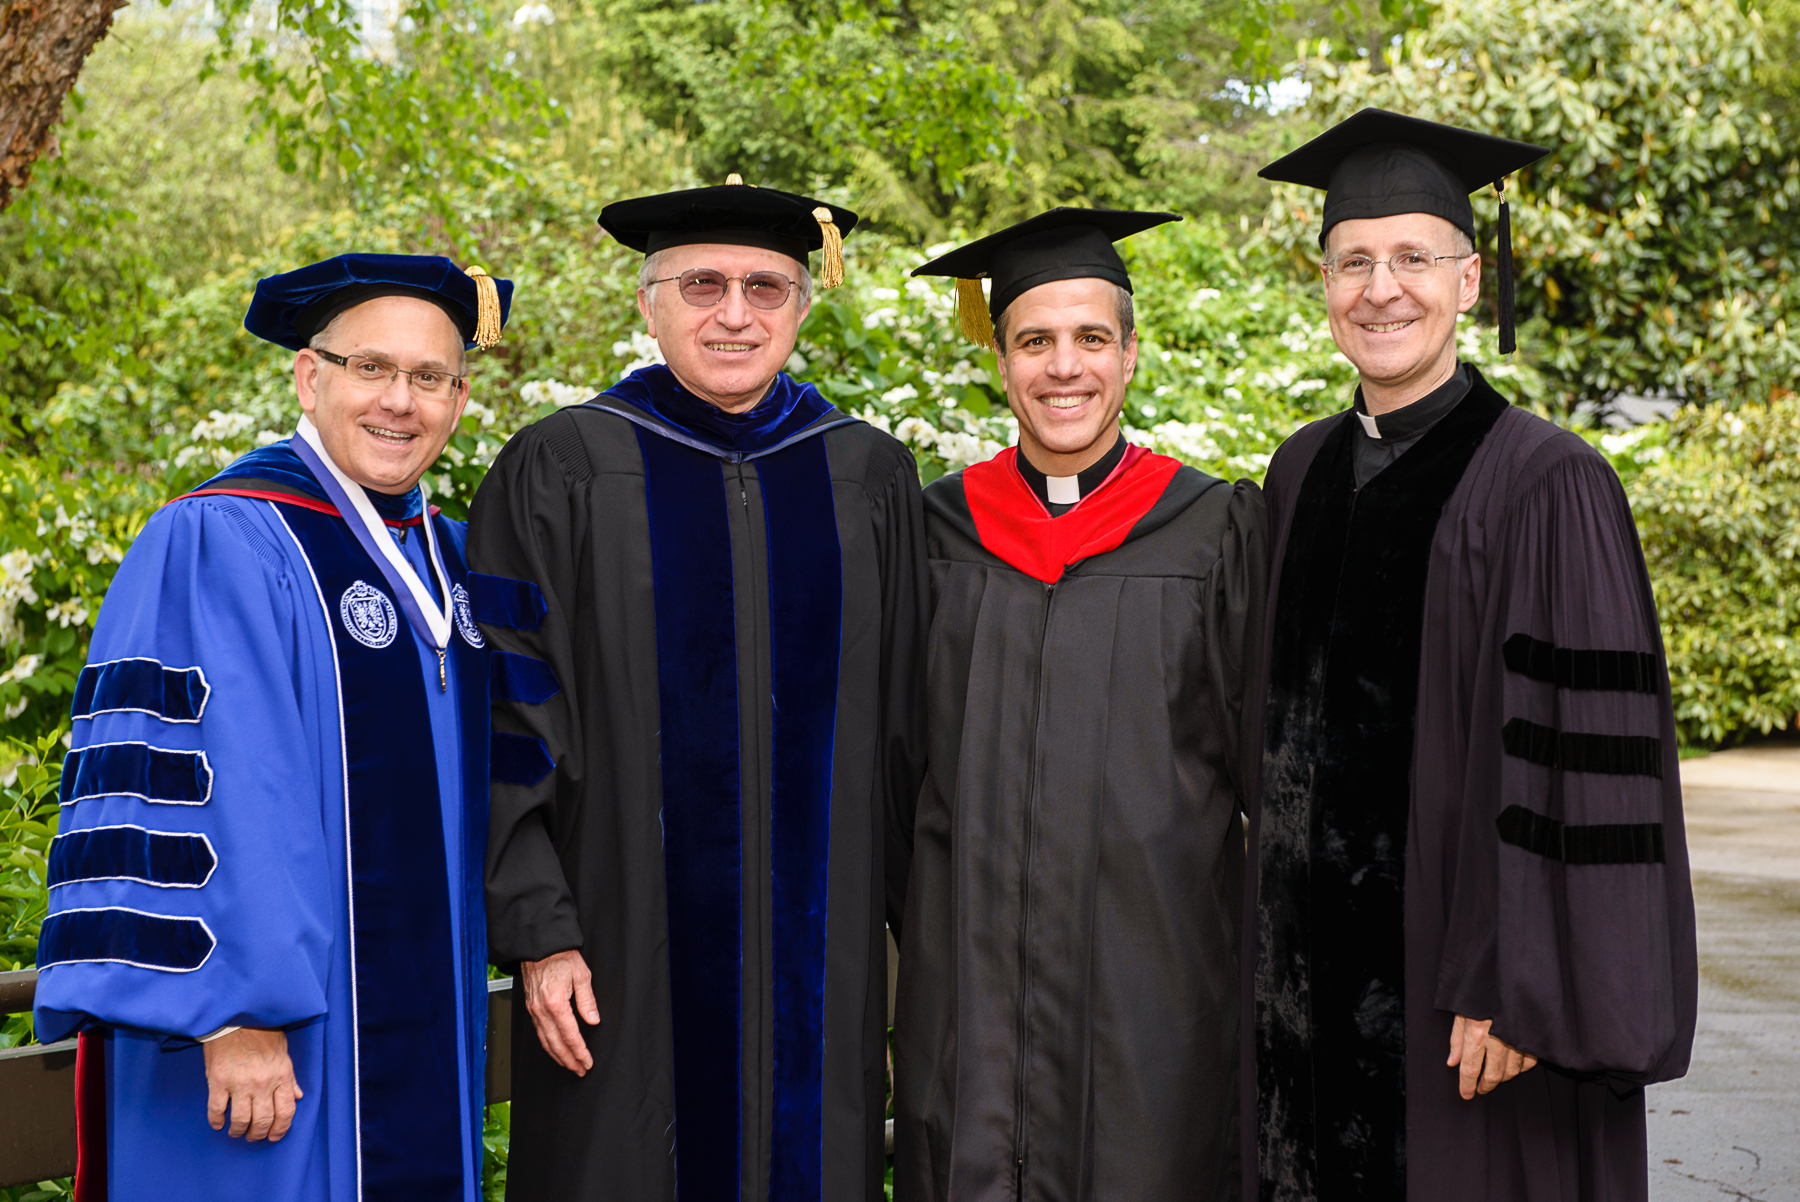 Saint Peter’s Celebrates Commencement for its “First Class”